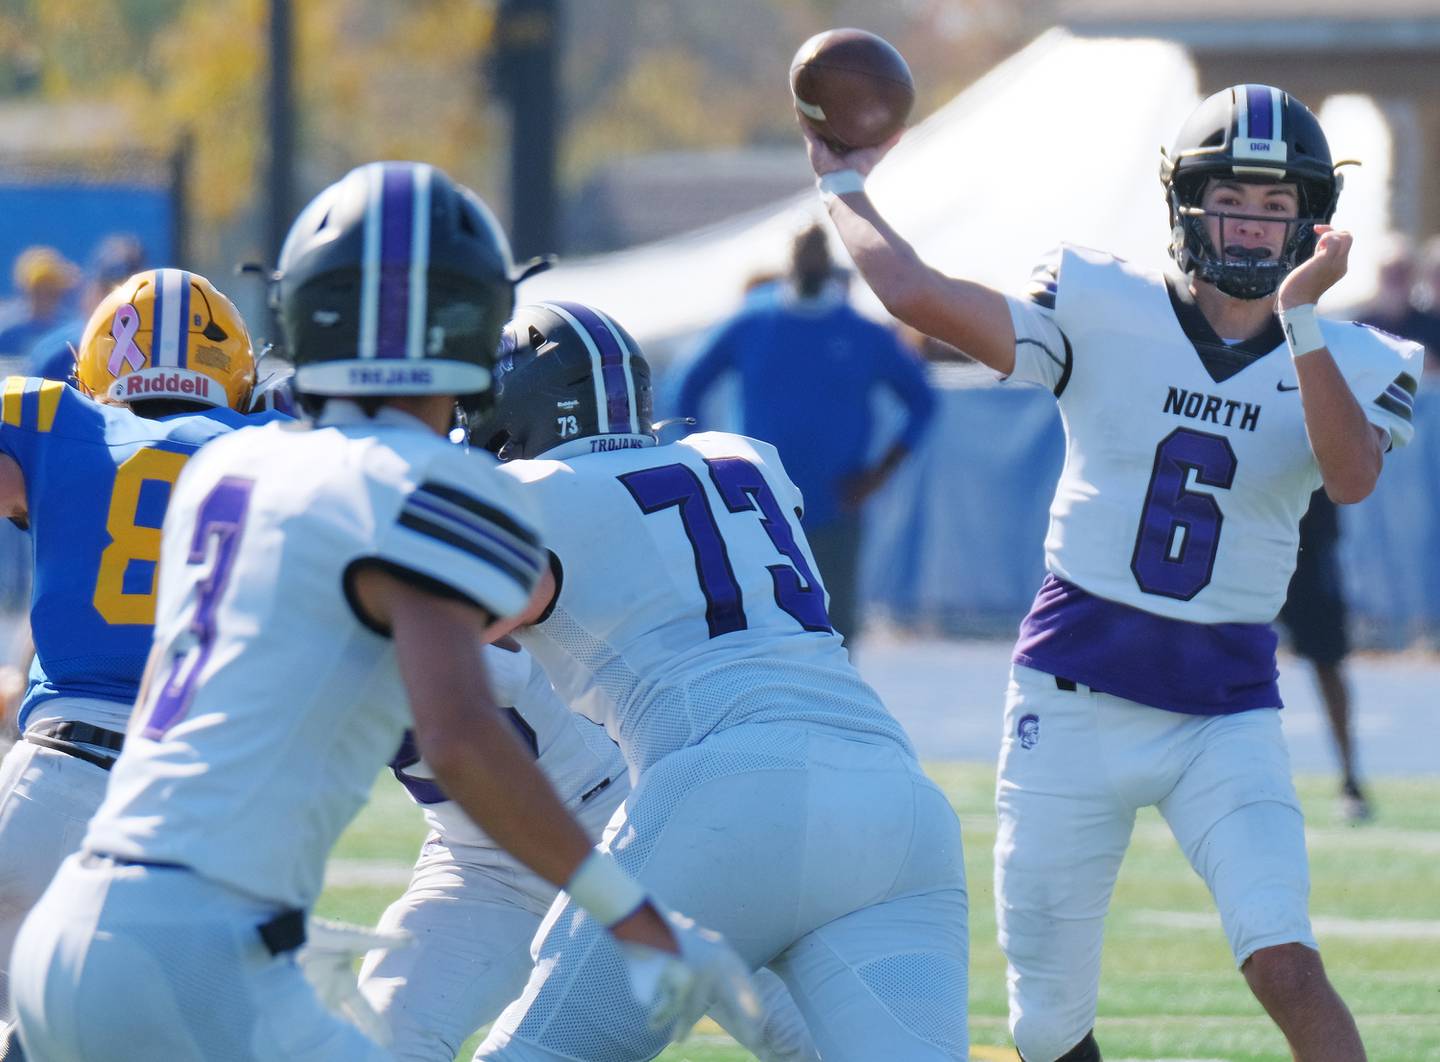 Downers Grove North quarterback Sam Reichert (6) fires a pass to Ethan Thulin (3) during a game on Oct. 22, 2022 at Lyons Township High School in LaGrange.